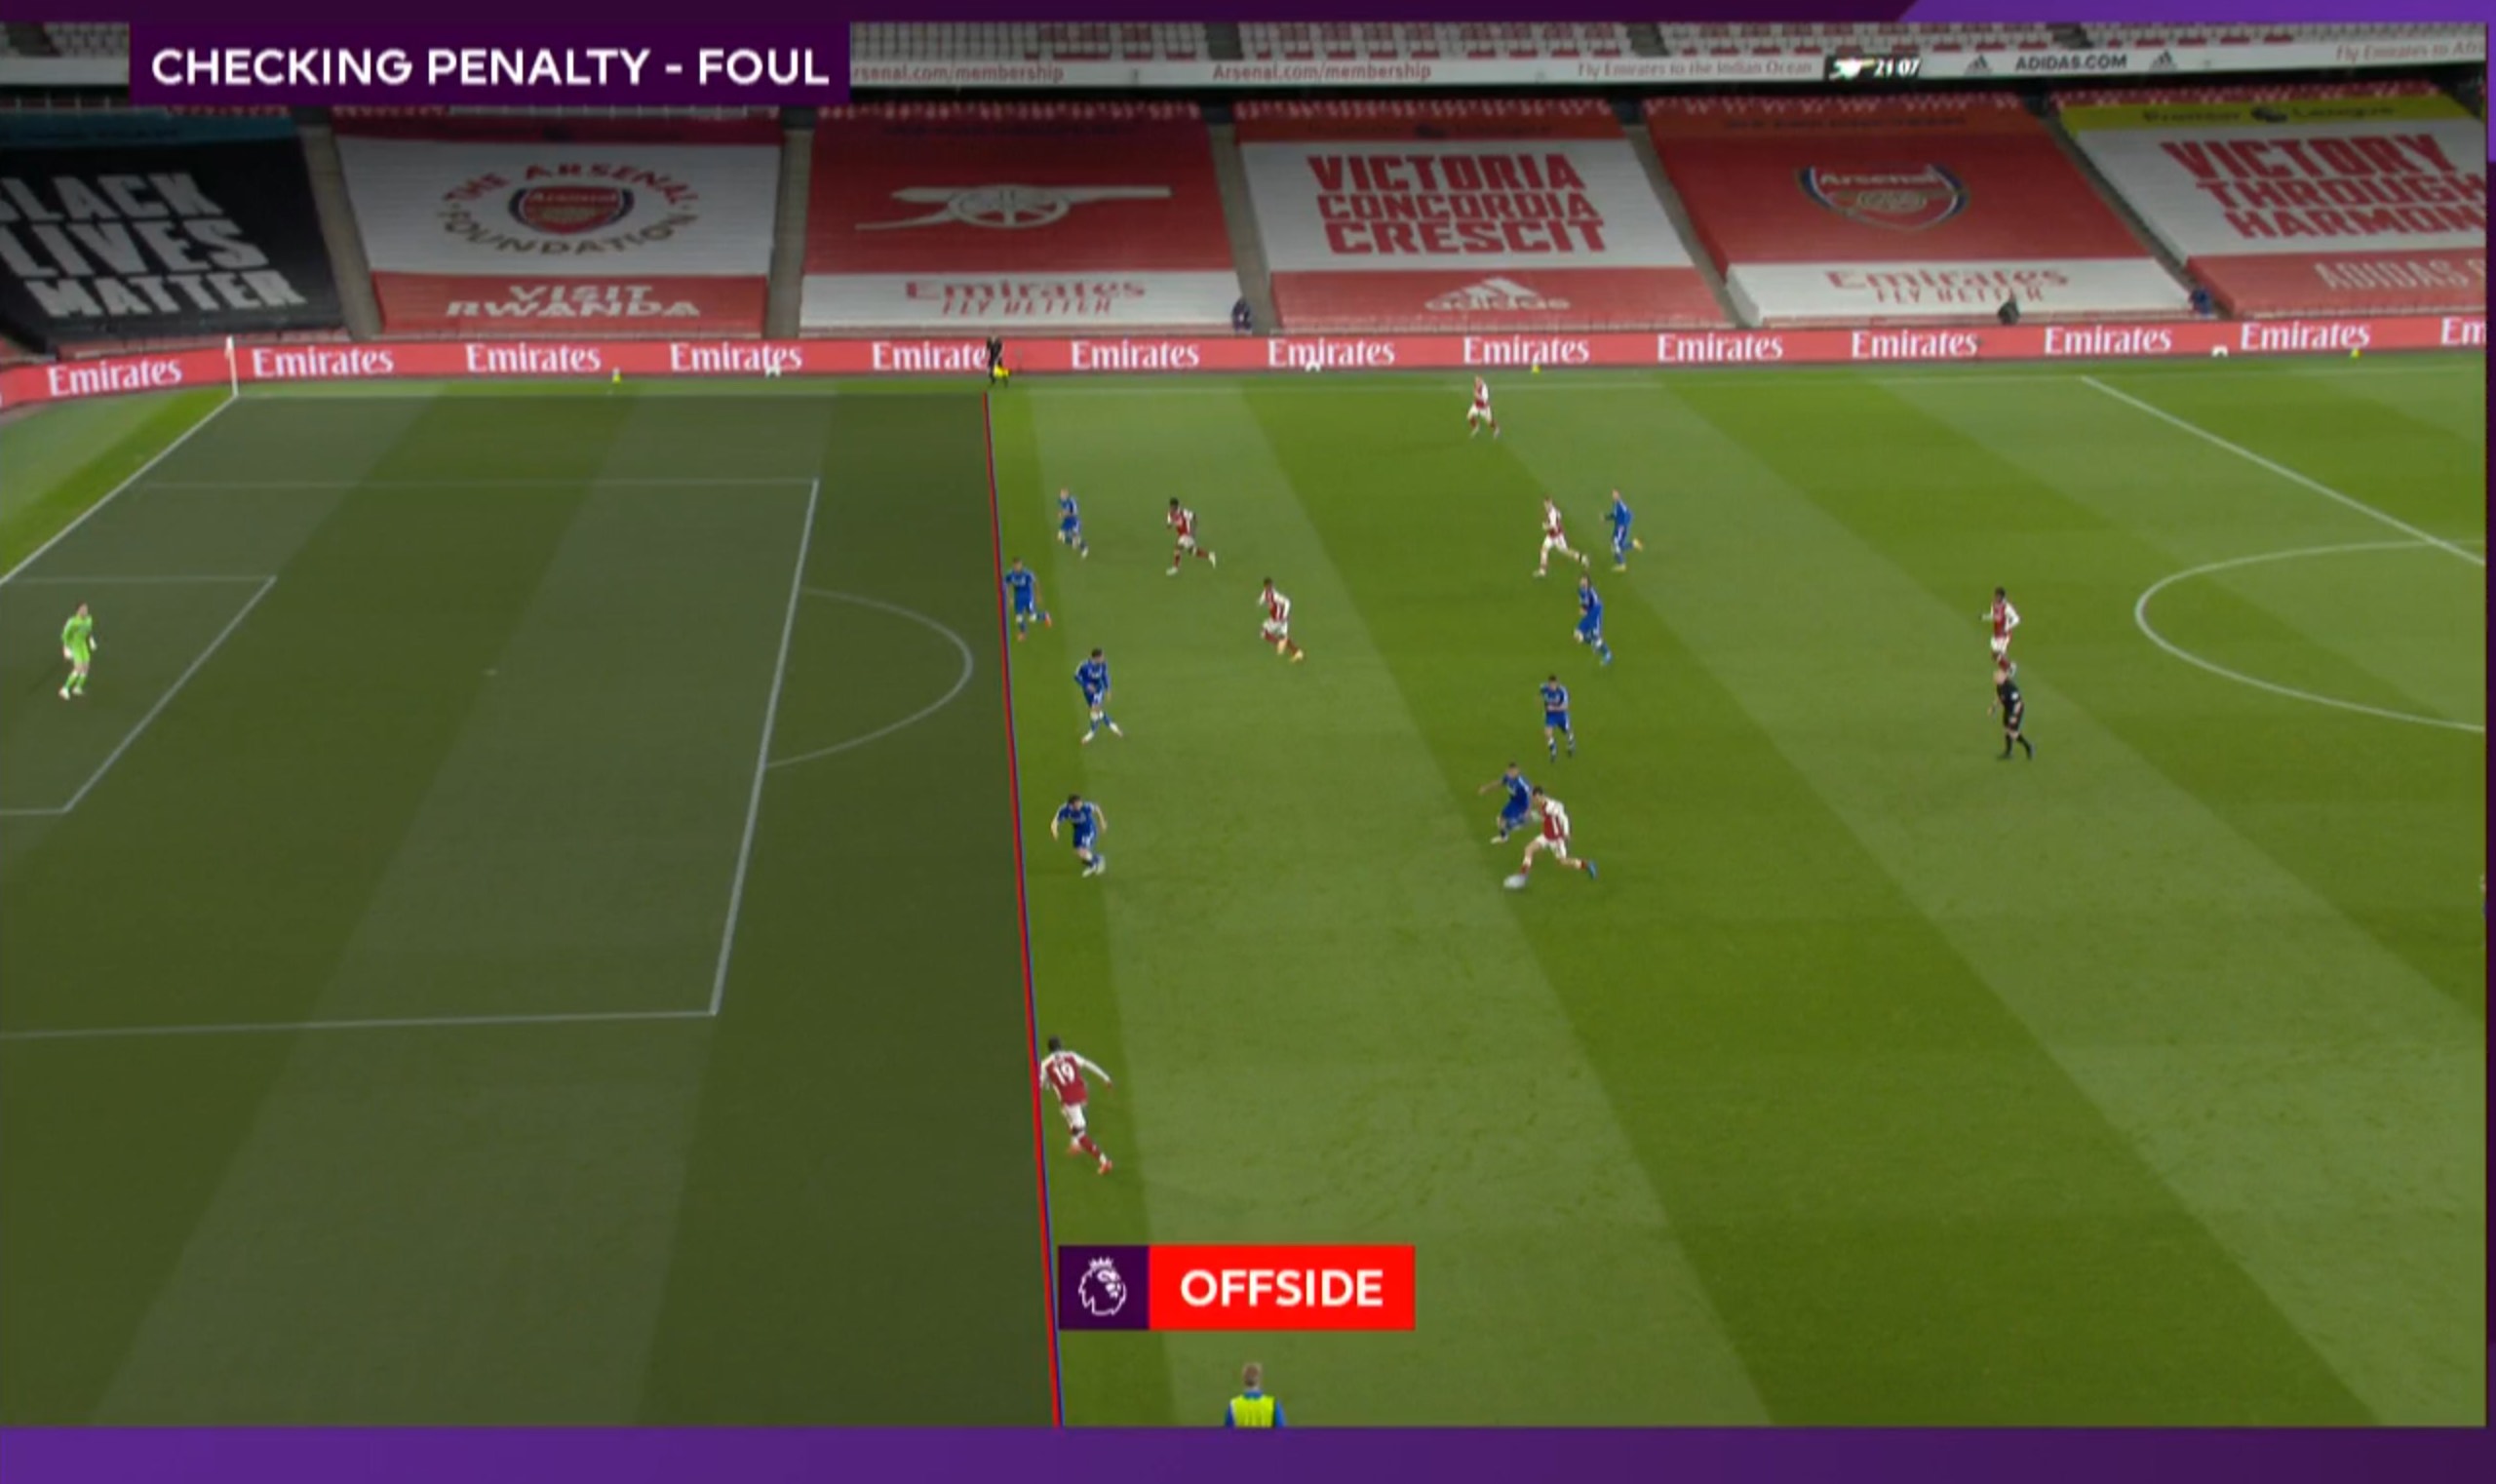 VAR shows Nicolas Pepe's elbow is offside against Everton